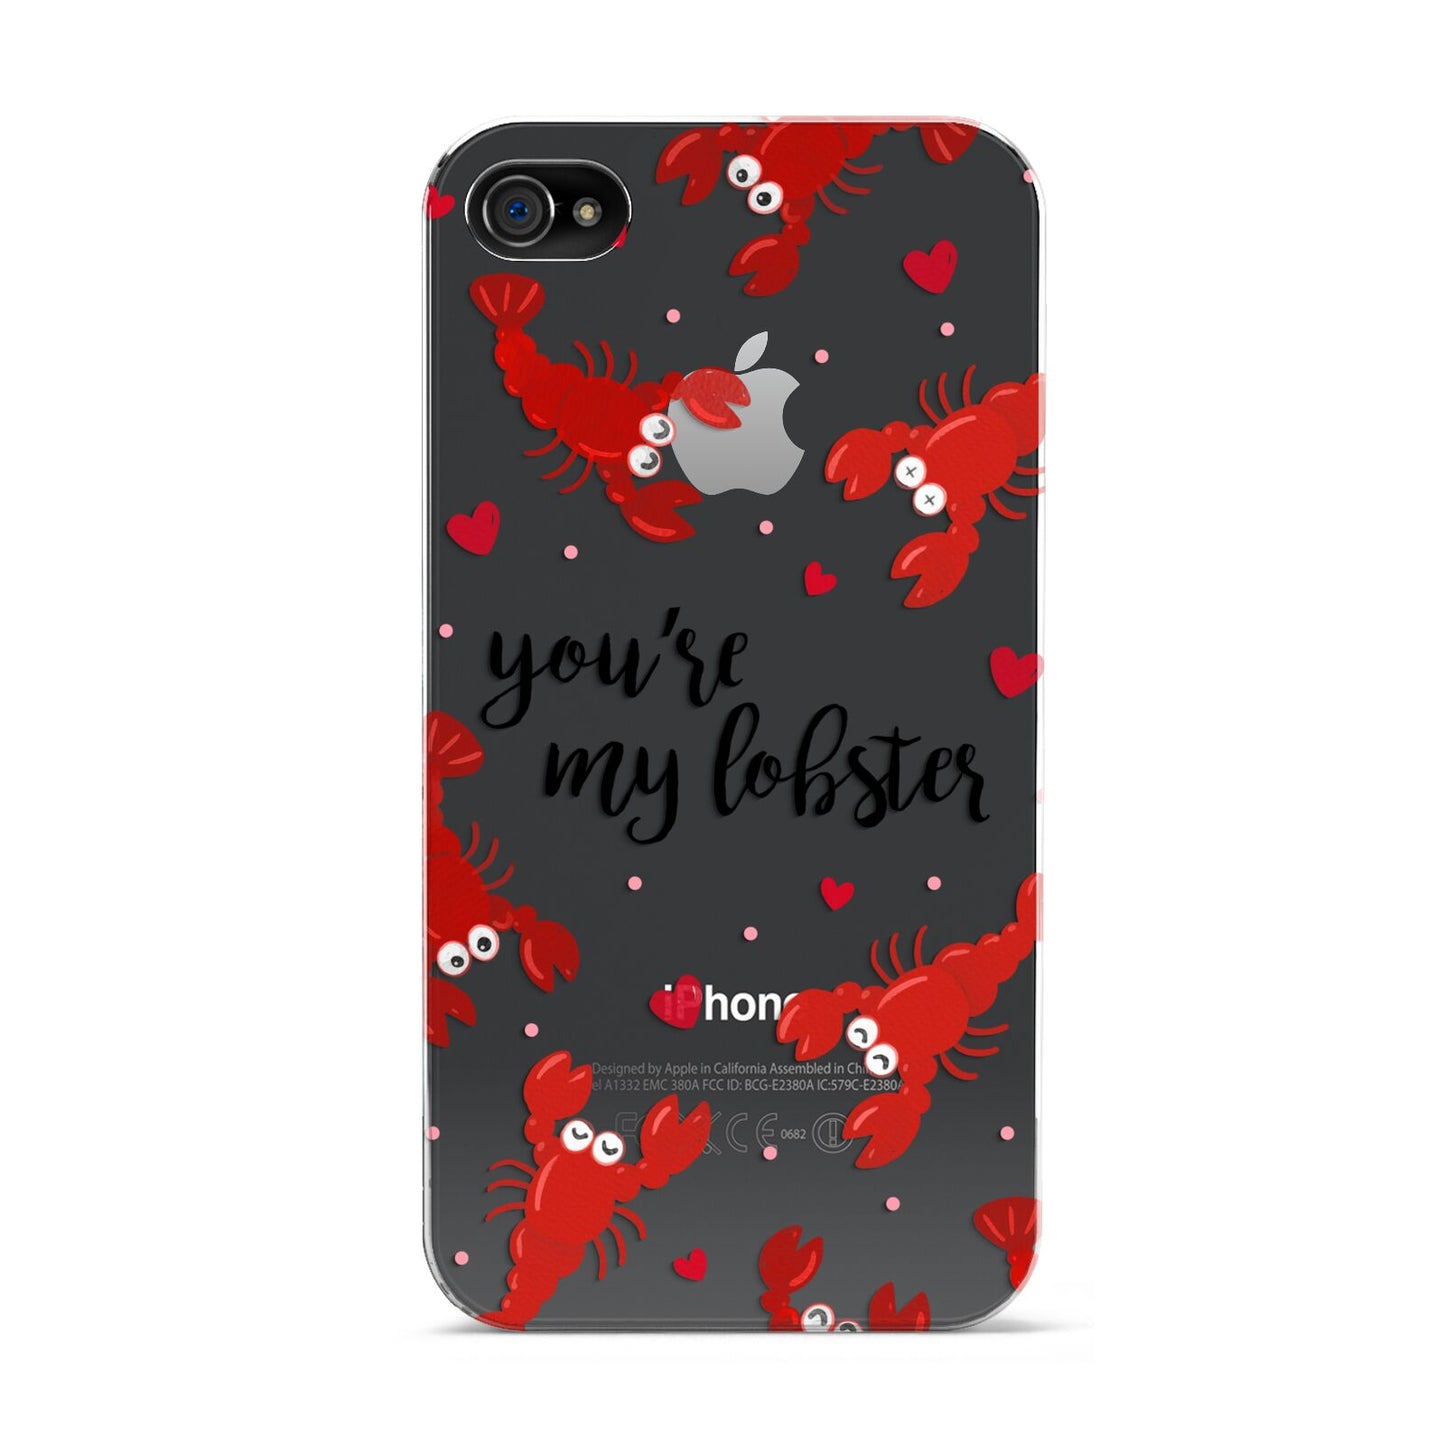 Youre My Lobster Apple iPhone 4s Case